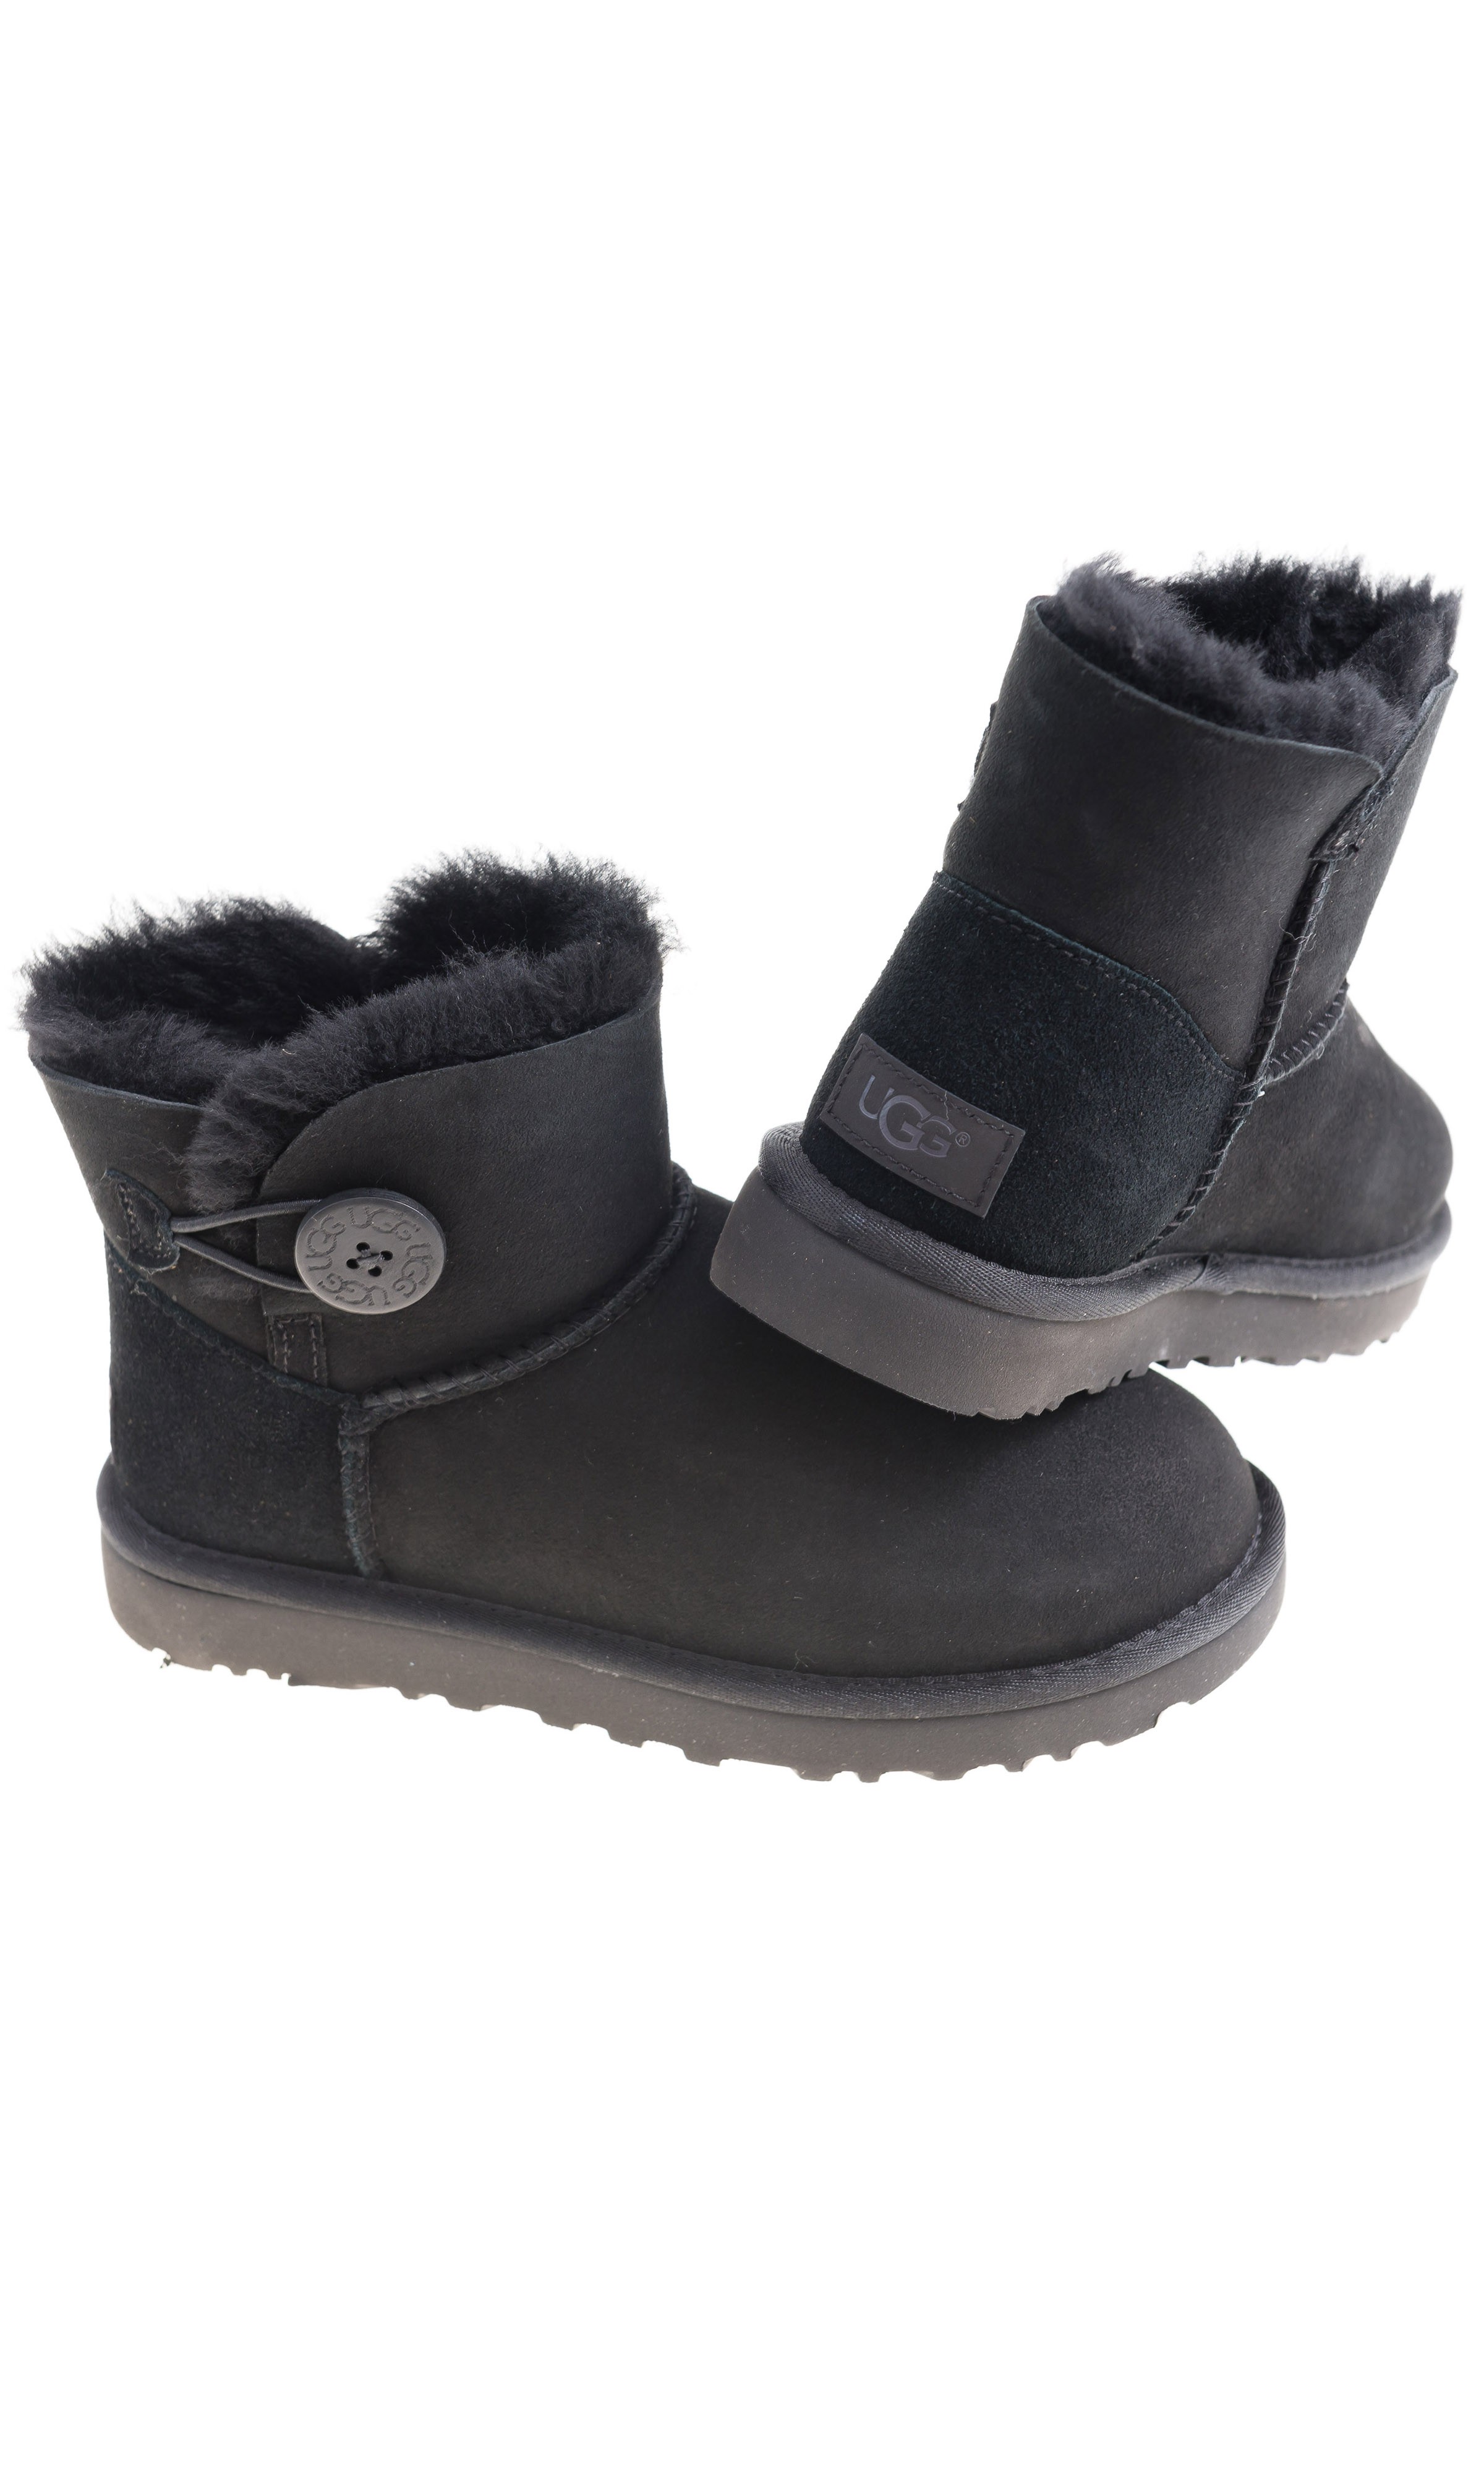 black uggs with buttons on the side